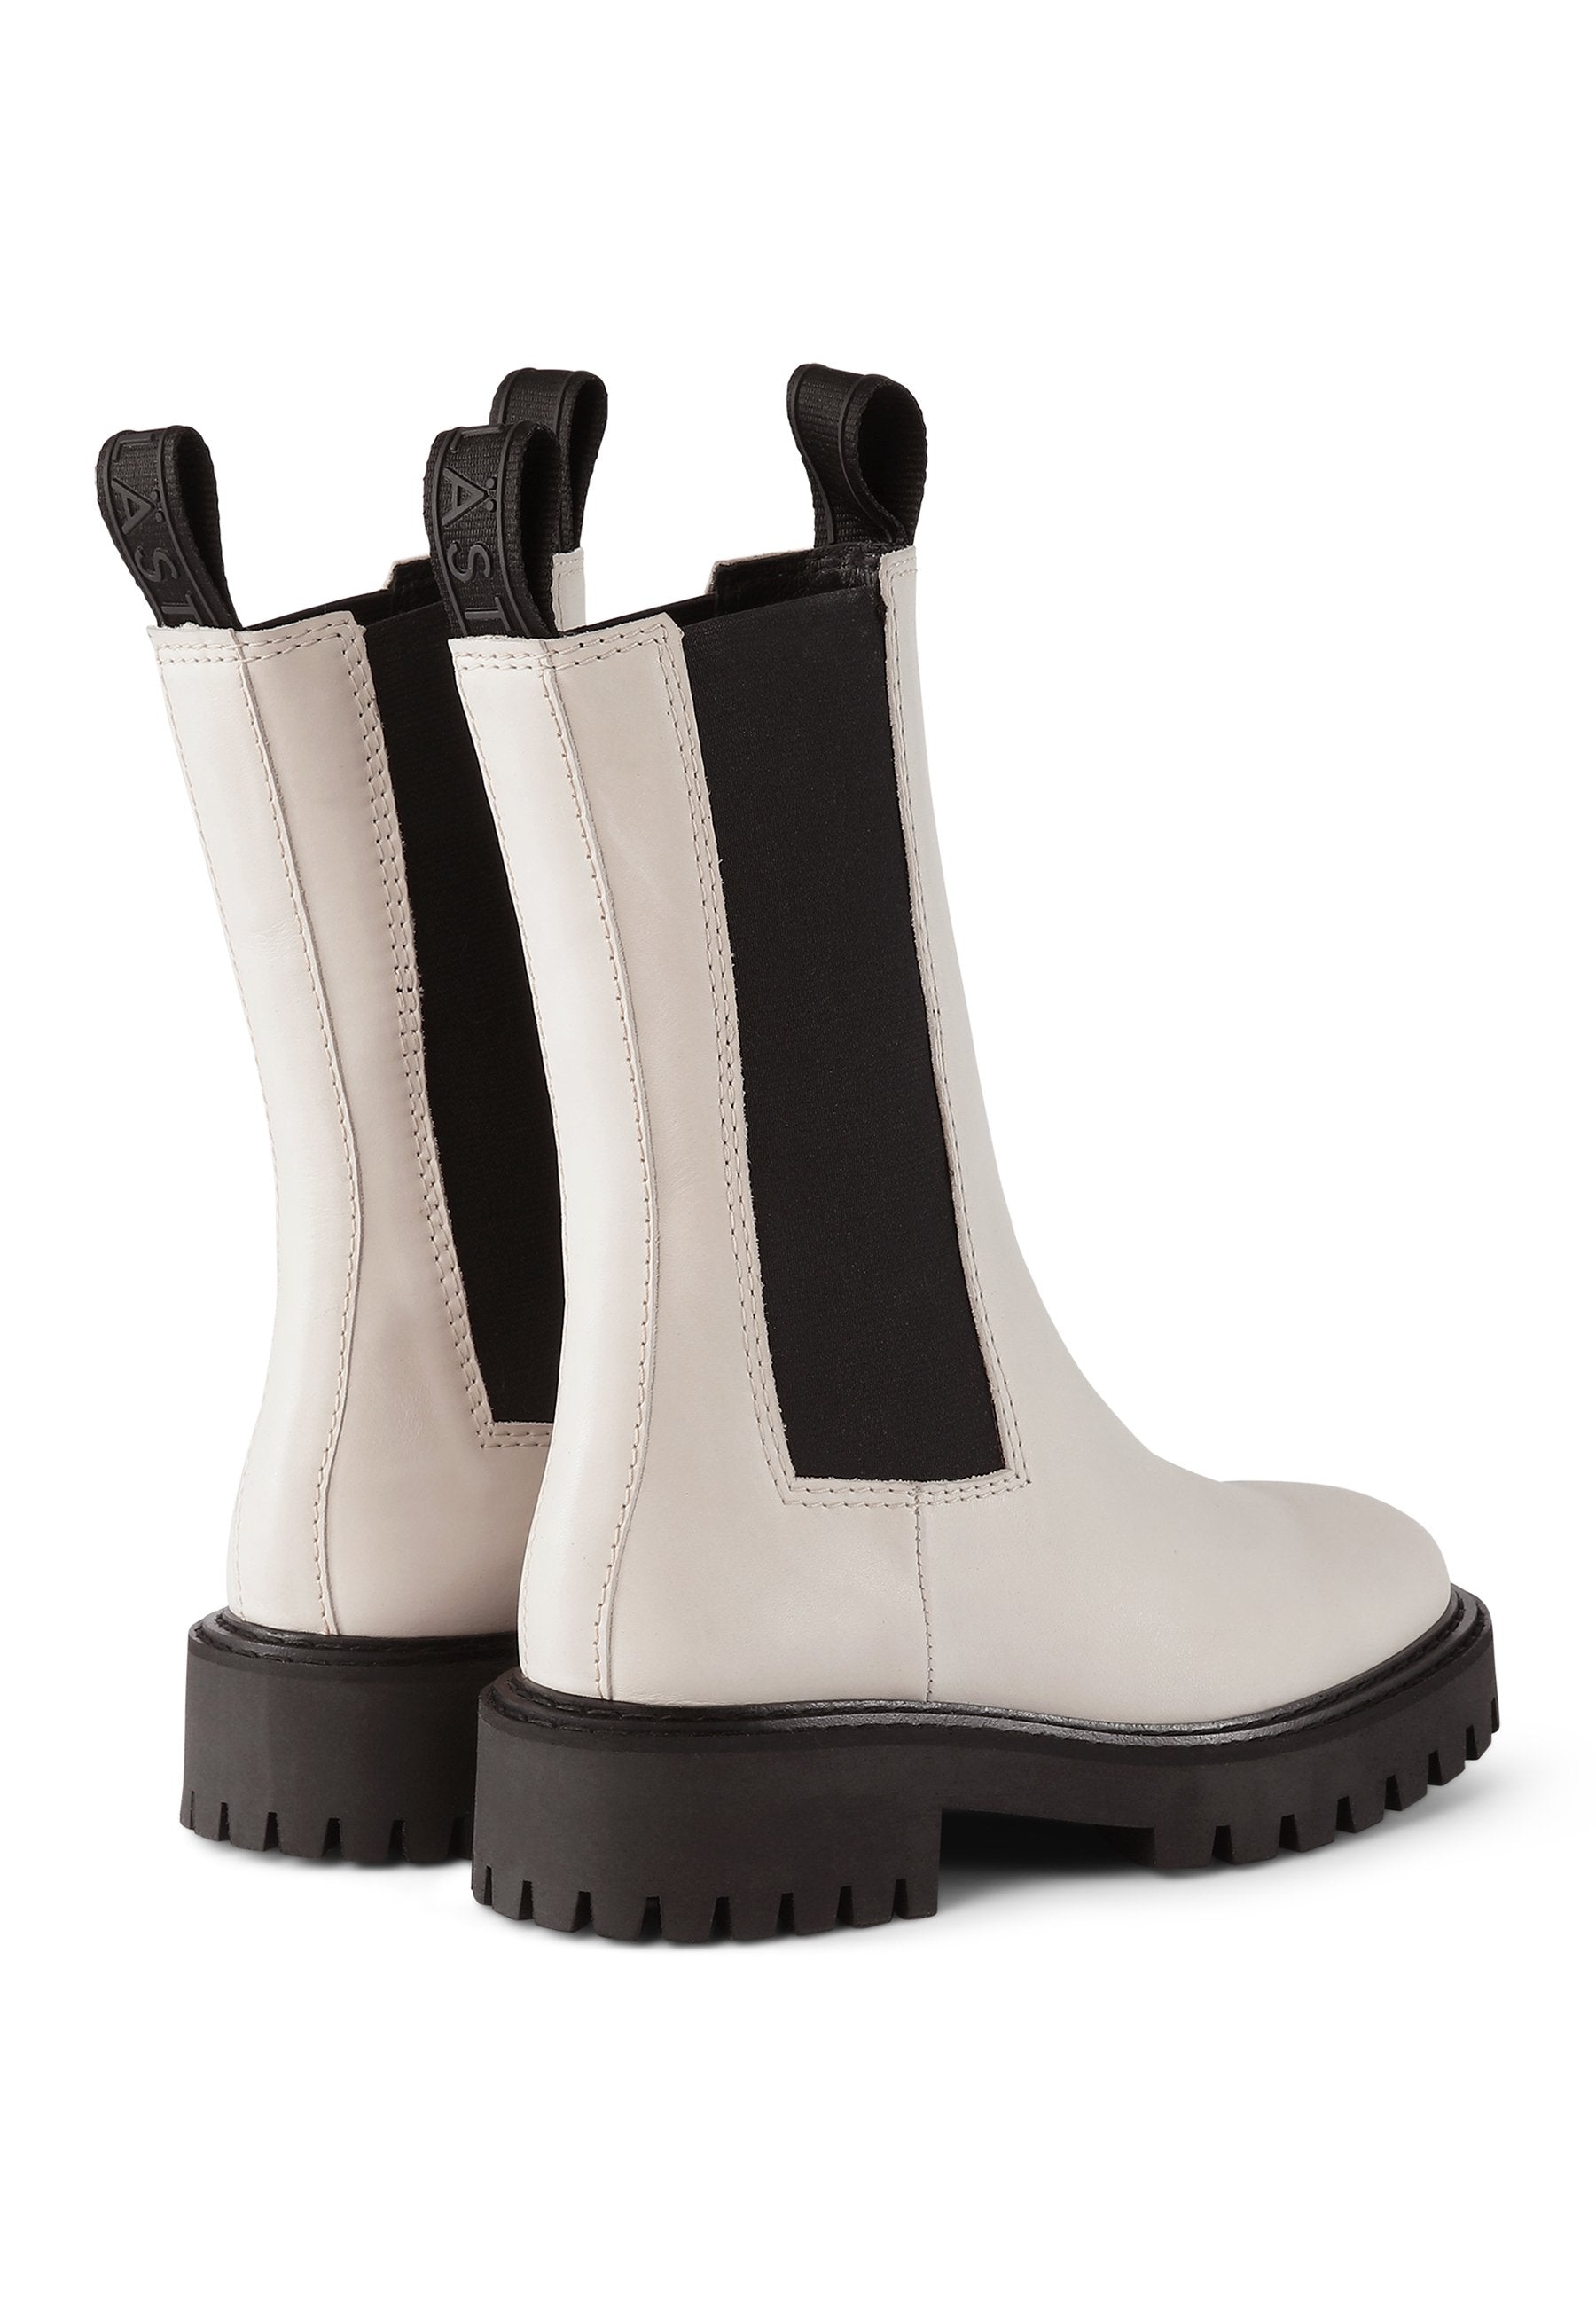 Angie Chelsea Off White Boots LAST1283 - 4